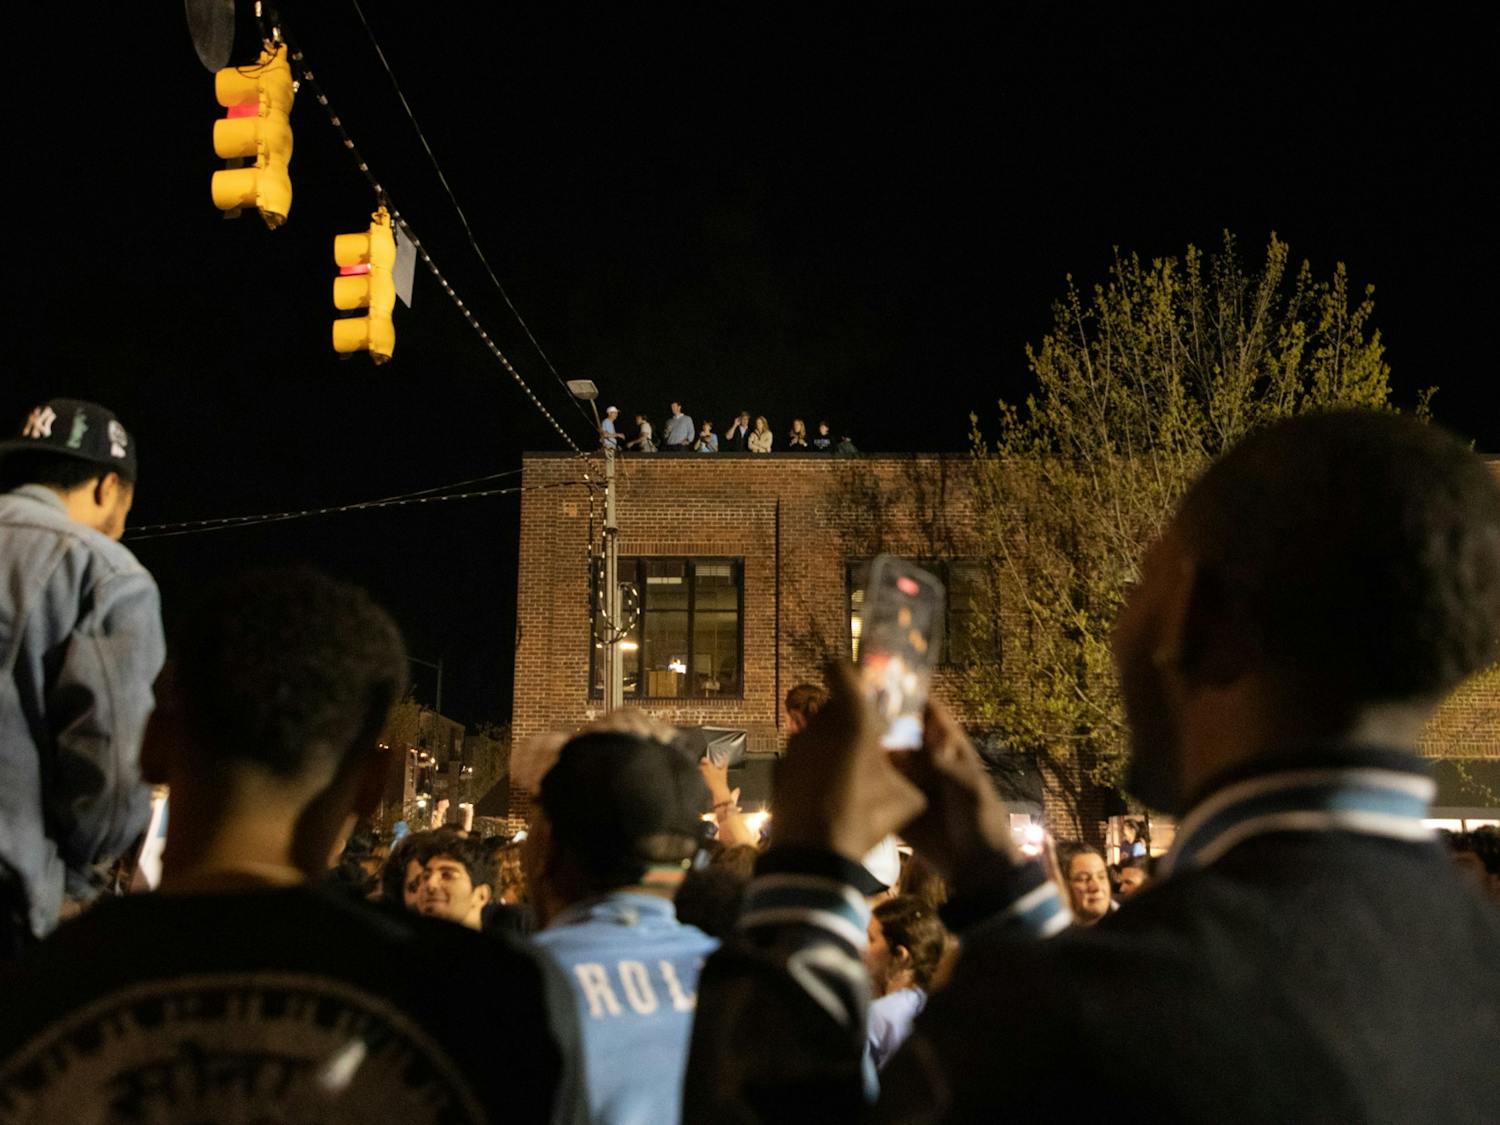 UNC fans rush Franklin St. to celebrate the win over Duke in the Final Four game on Saturday, April 2, 2022.